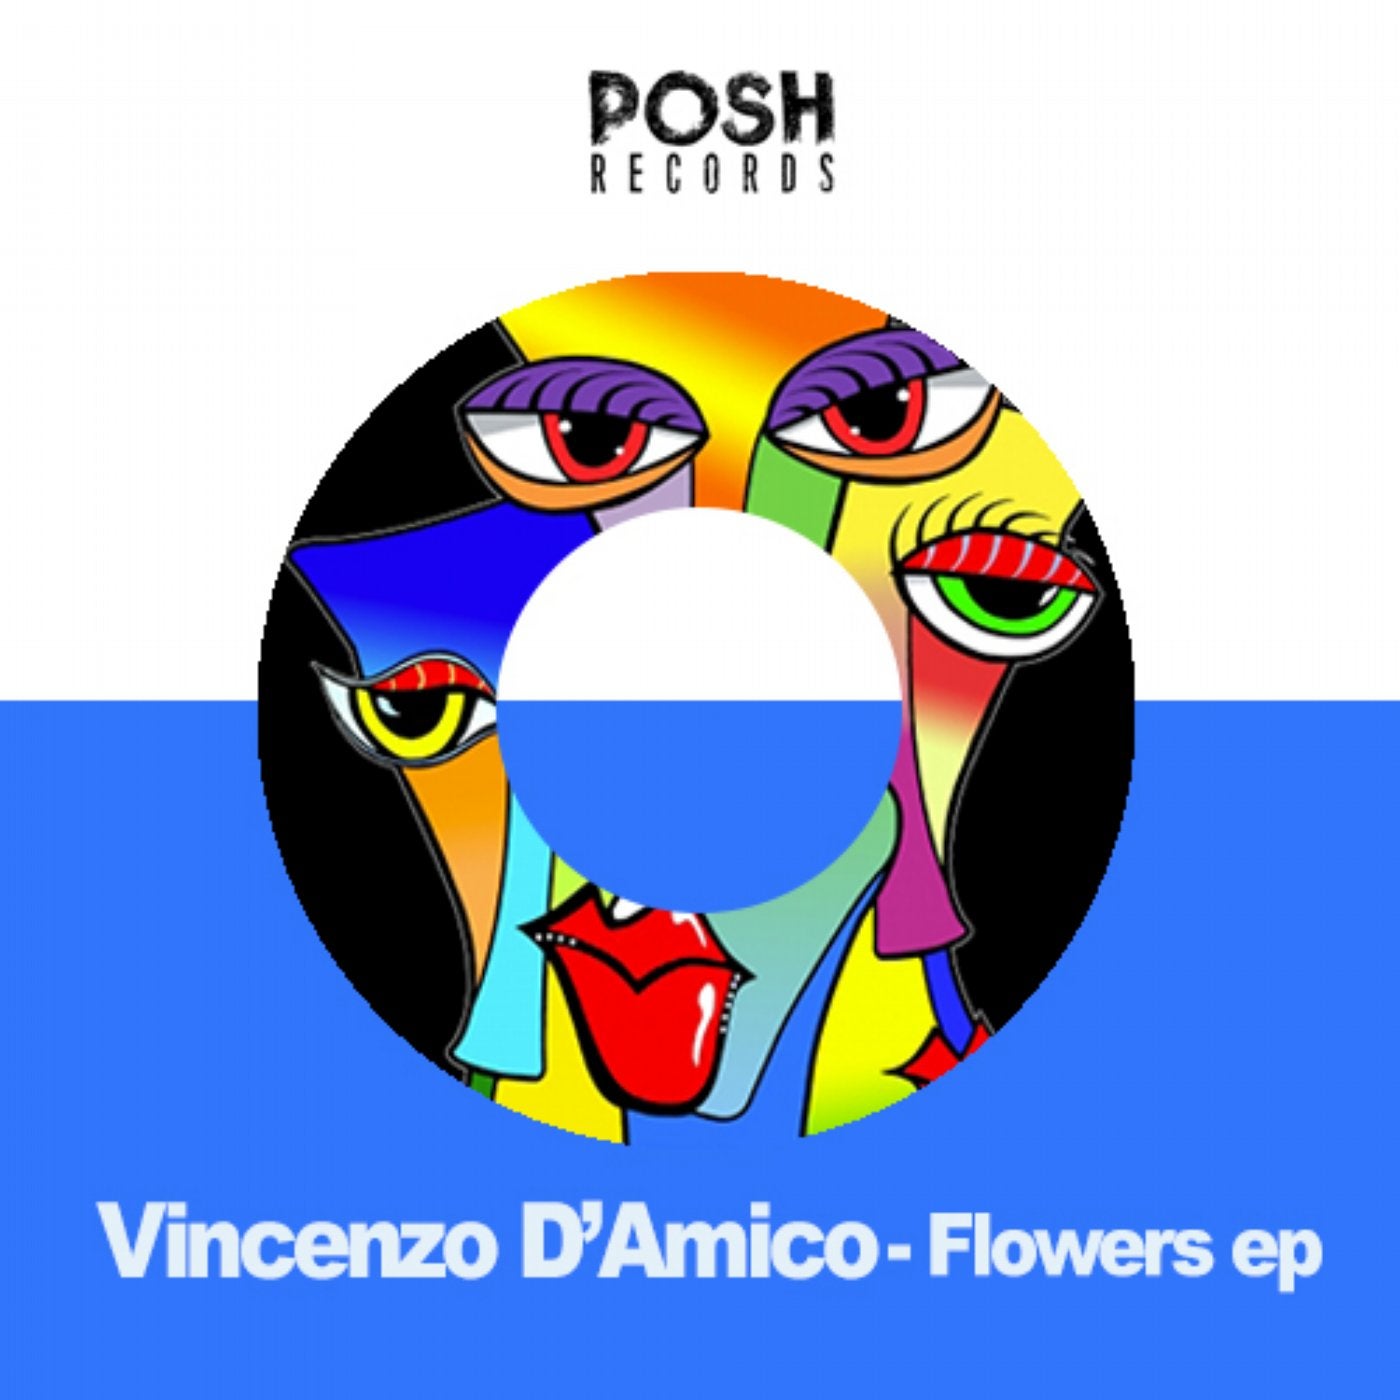 Vincenzo D'Amico - Flowers Ep